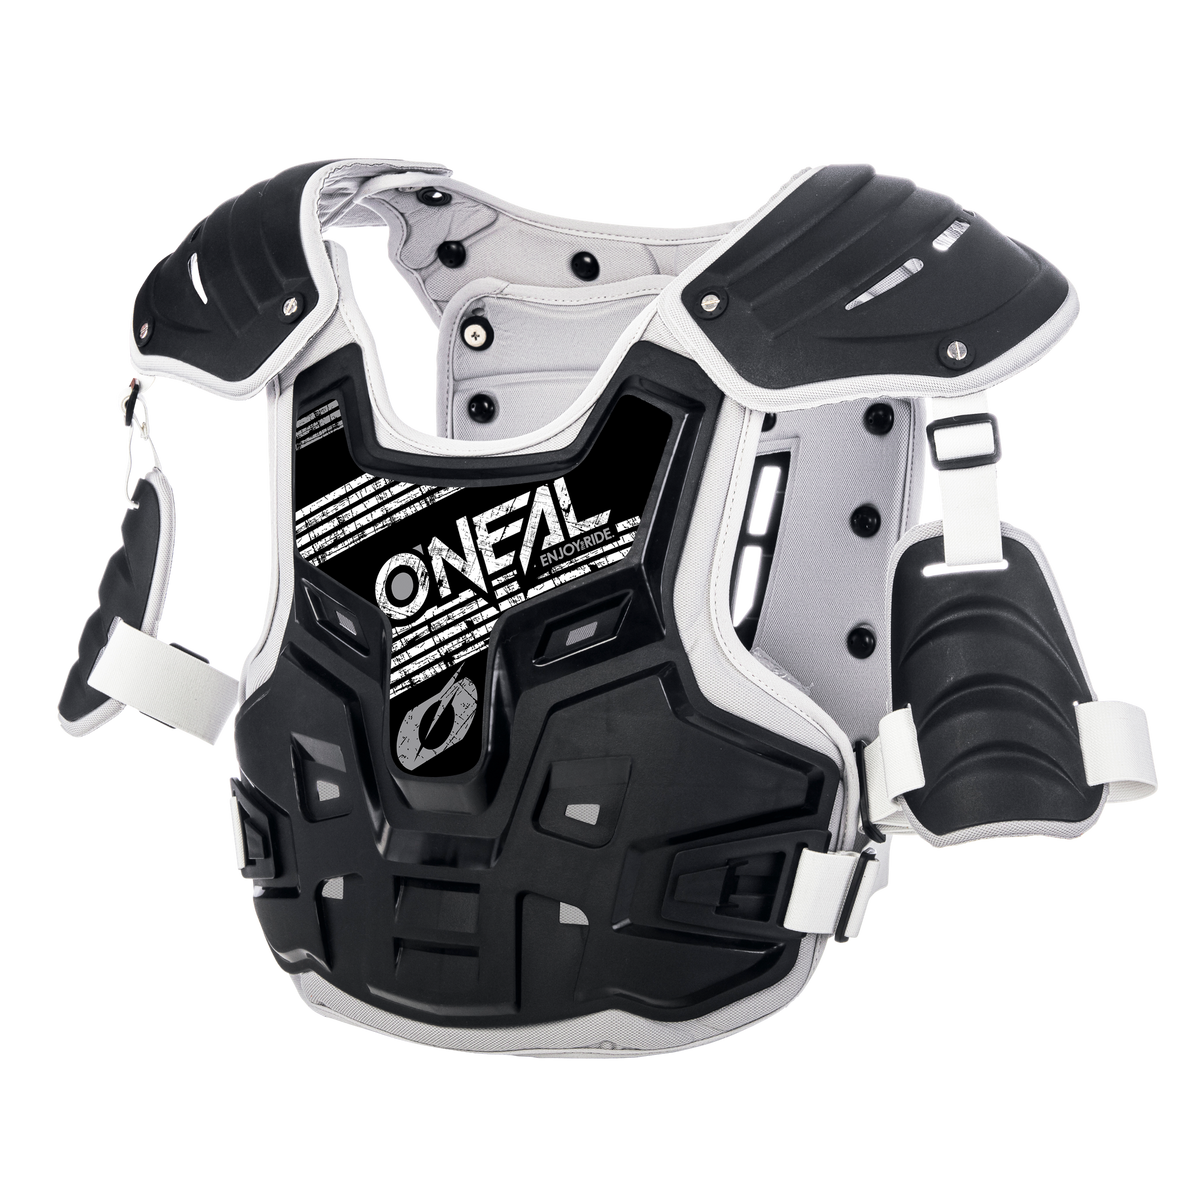 https://cdn.oneal.eu/assets/importedProductImages/PROTECTION/BODY%20ARMOUR/PXR%20STONE%20SHIELD/black_gray/2018_ONeal_PXR_StoneShield_black_gray.png